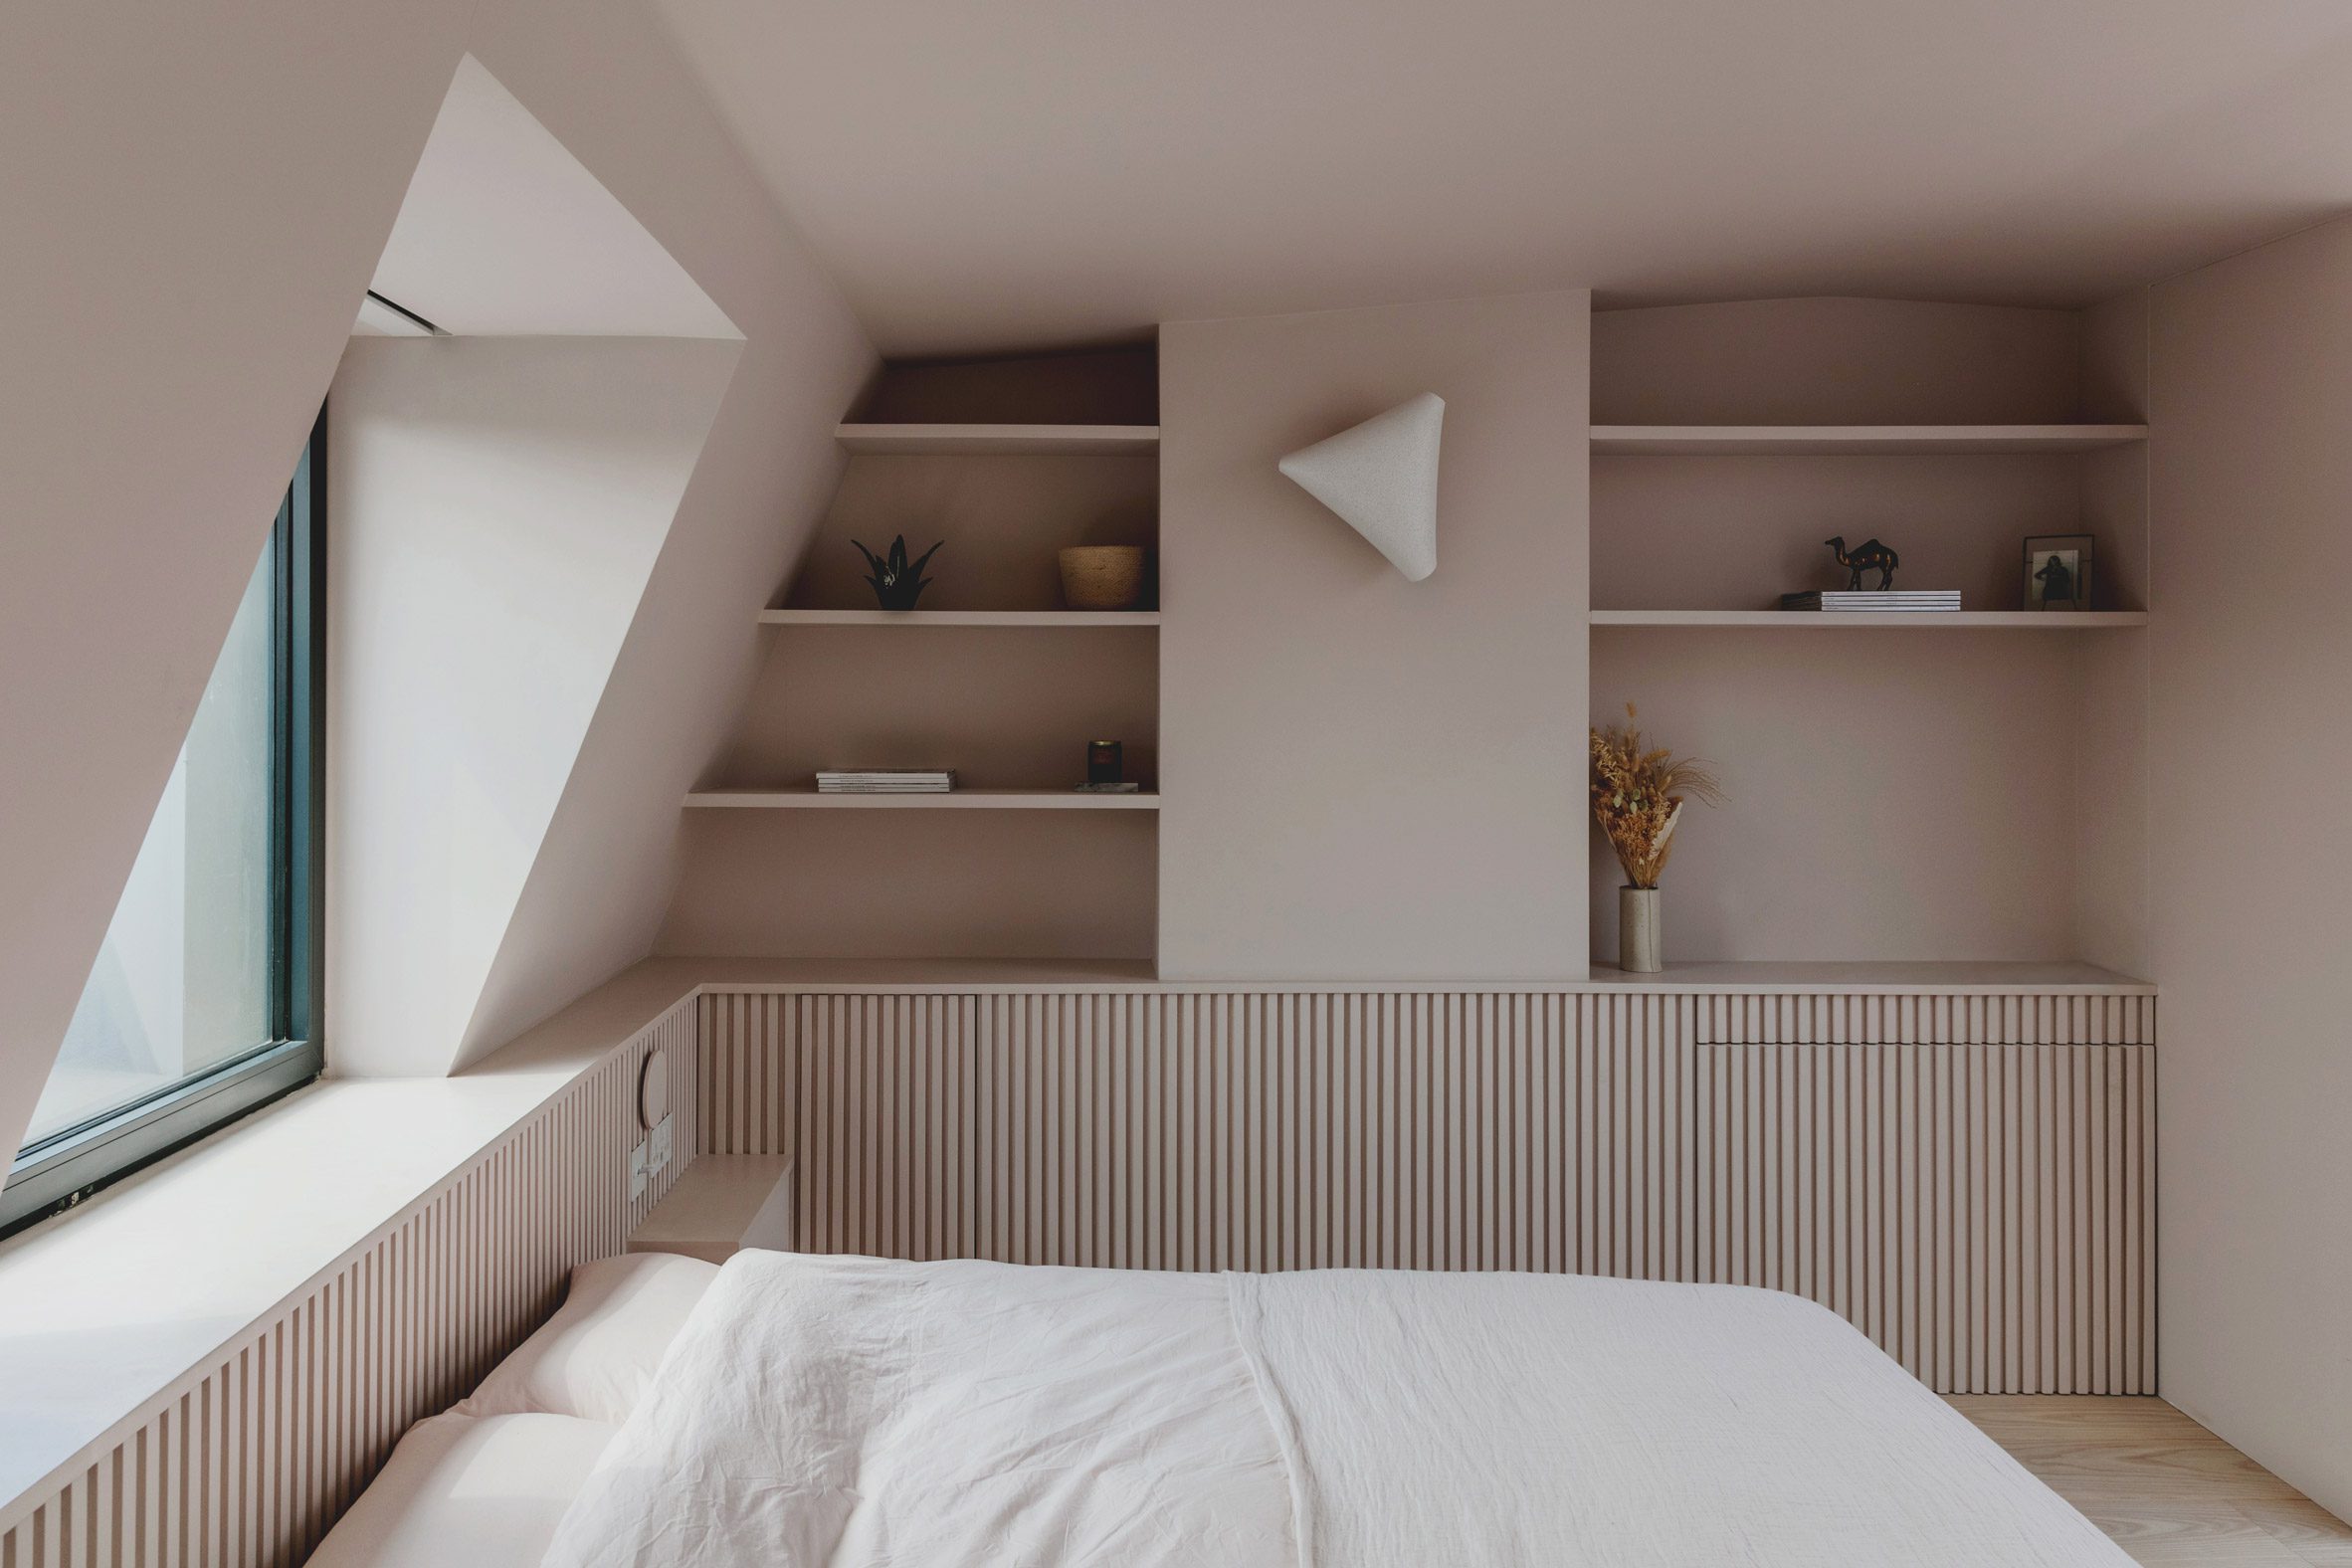 Bed and window in Narford Road by Emil Eve Architects